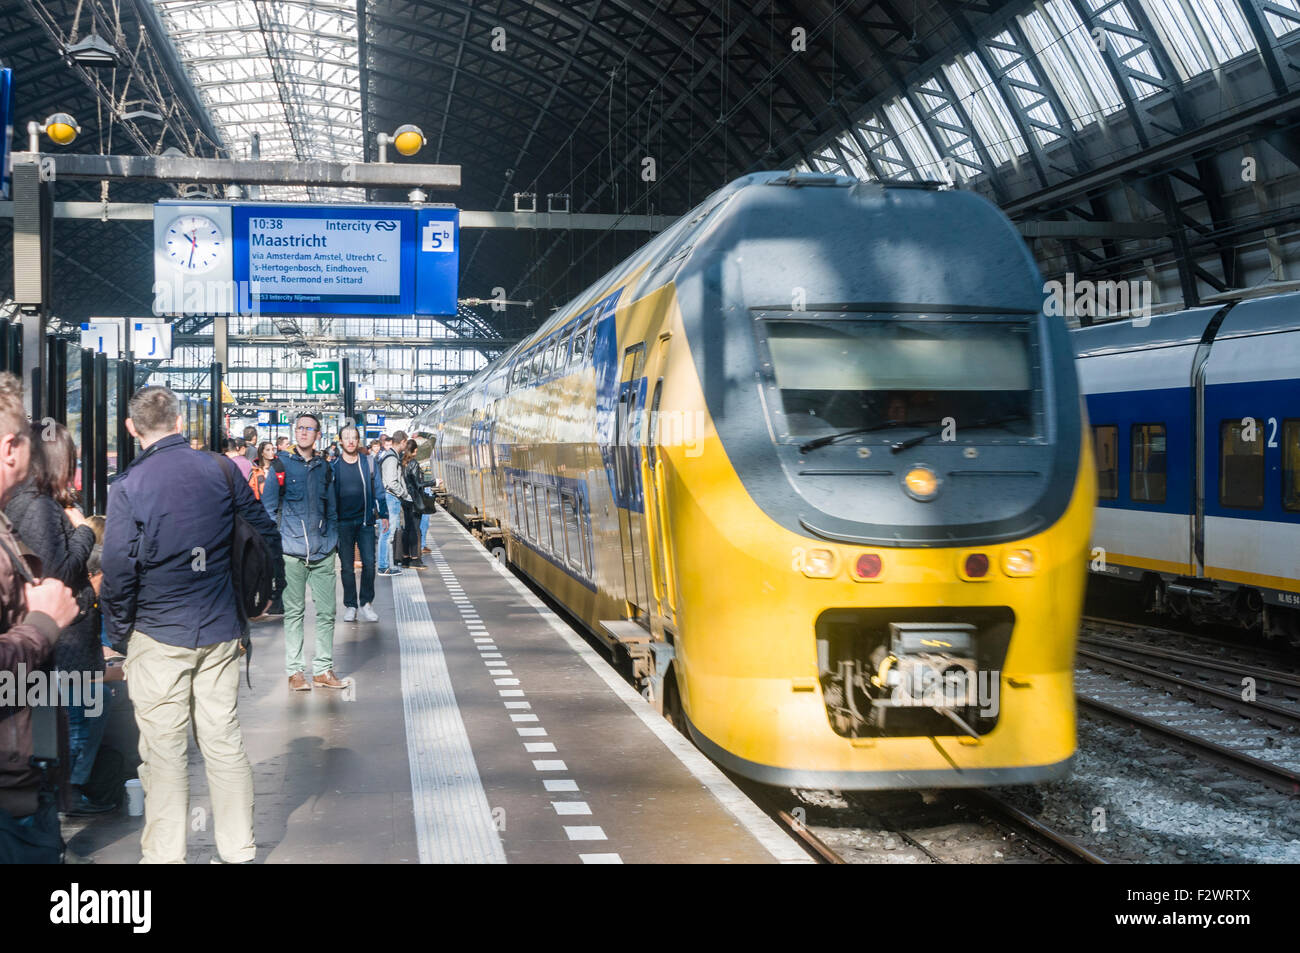 The train for Maastrict arrives at the platform in Amsterdam Centraal  Station Stock Photo - Alamy